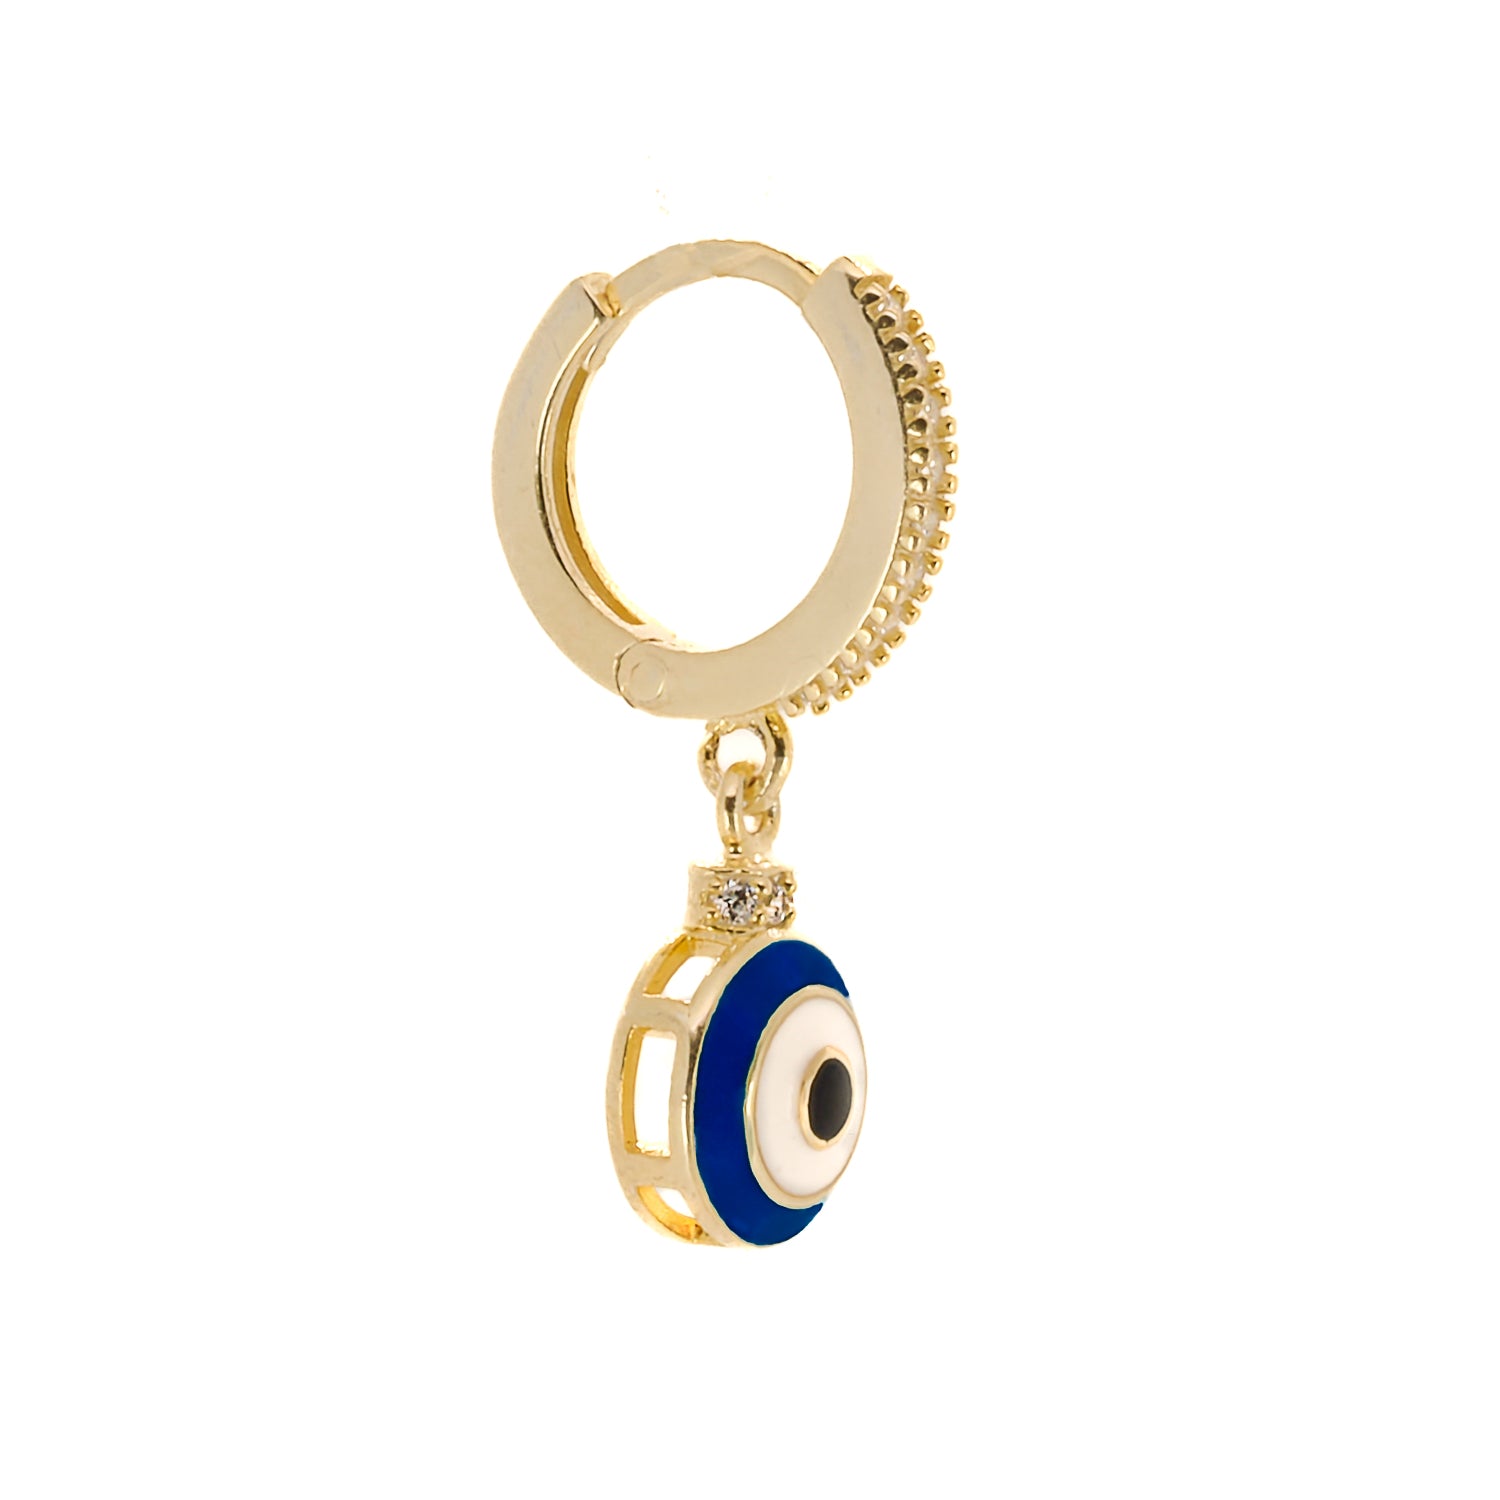 Handmade gold-plated earrings featuring a delicate blue evil eye design